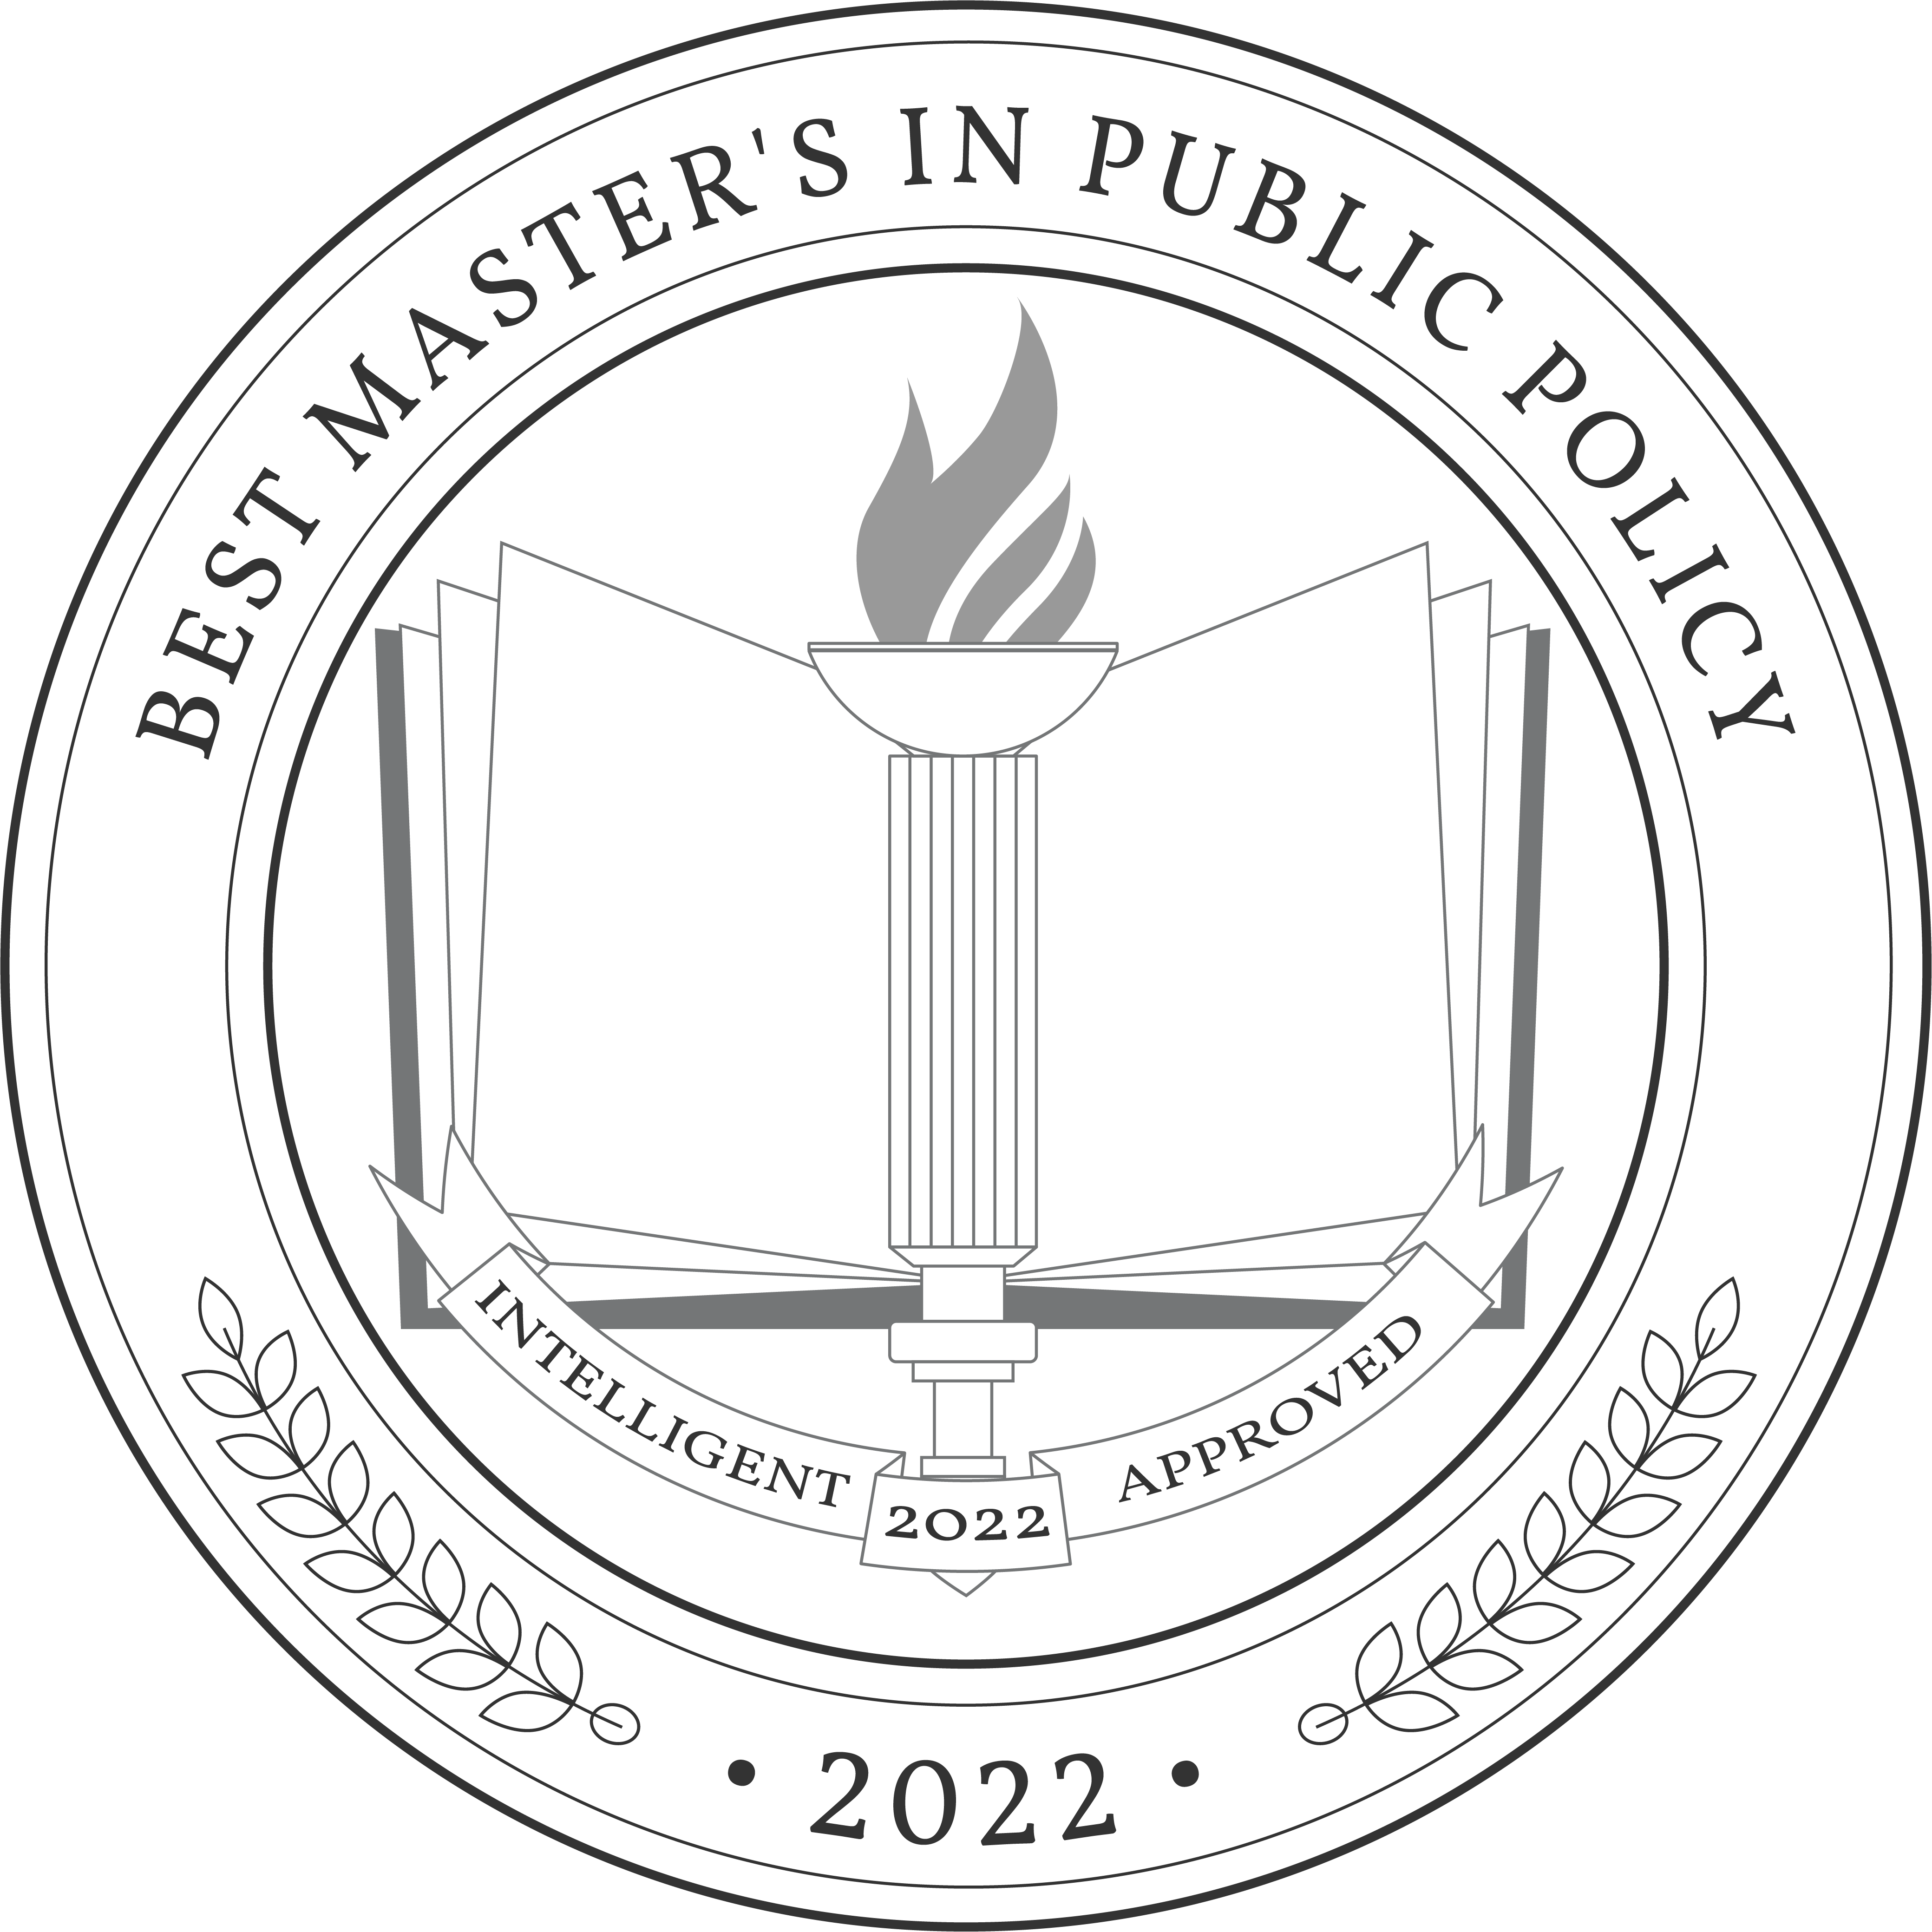 Best Master's in Public Policy Degree Programs